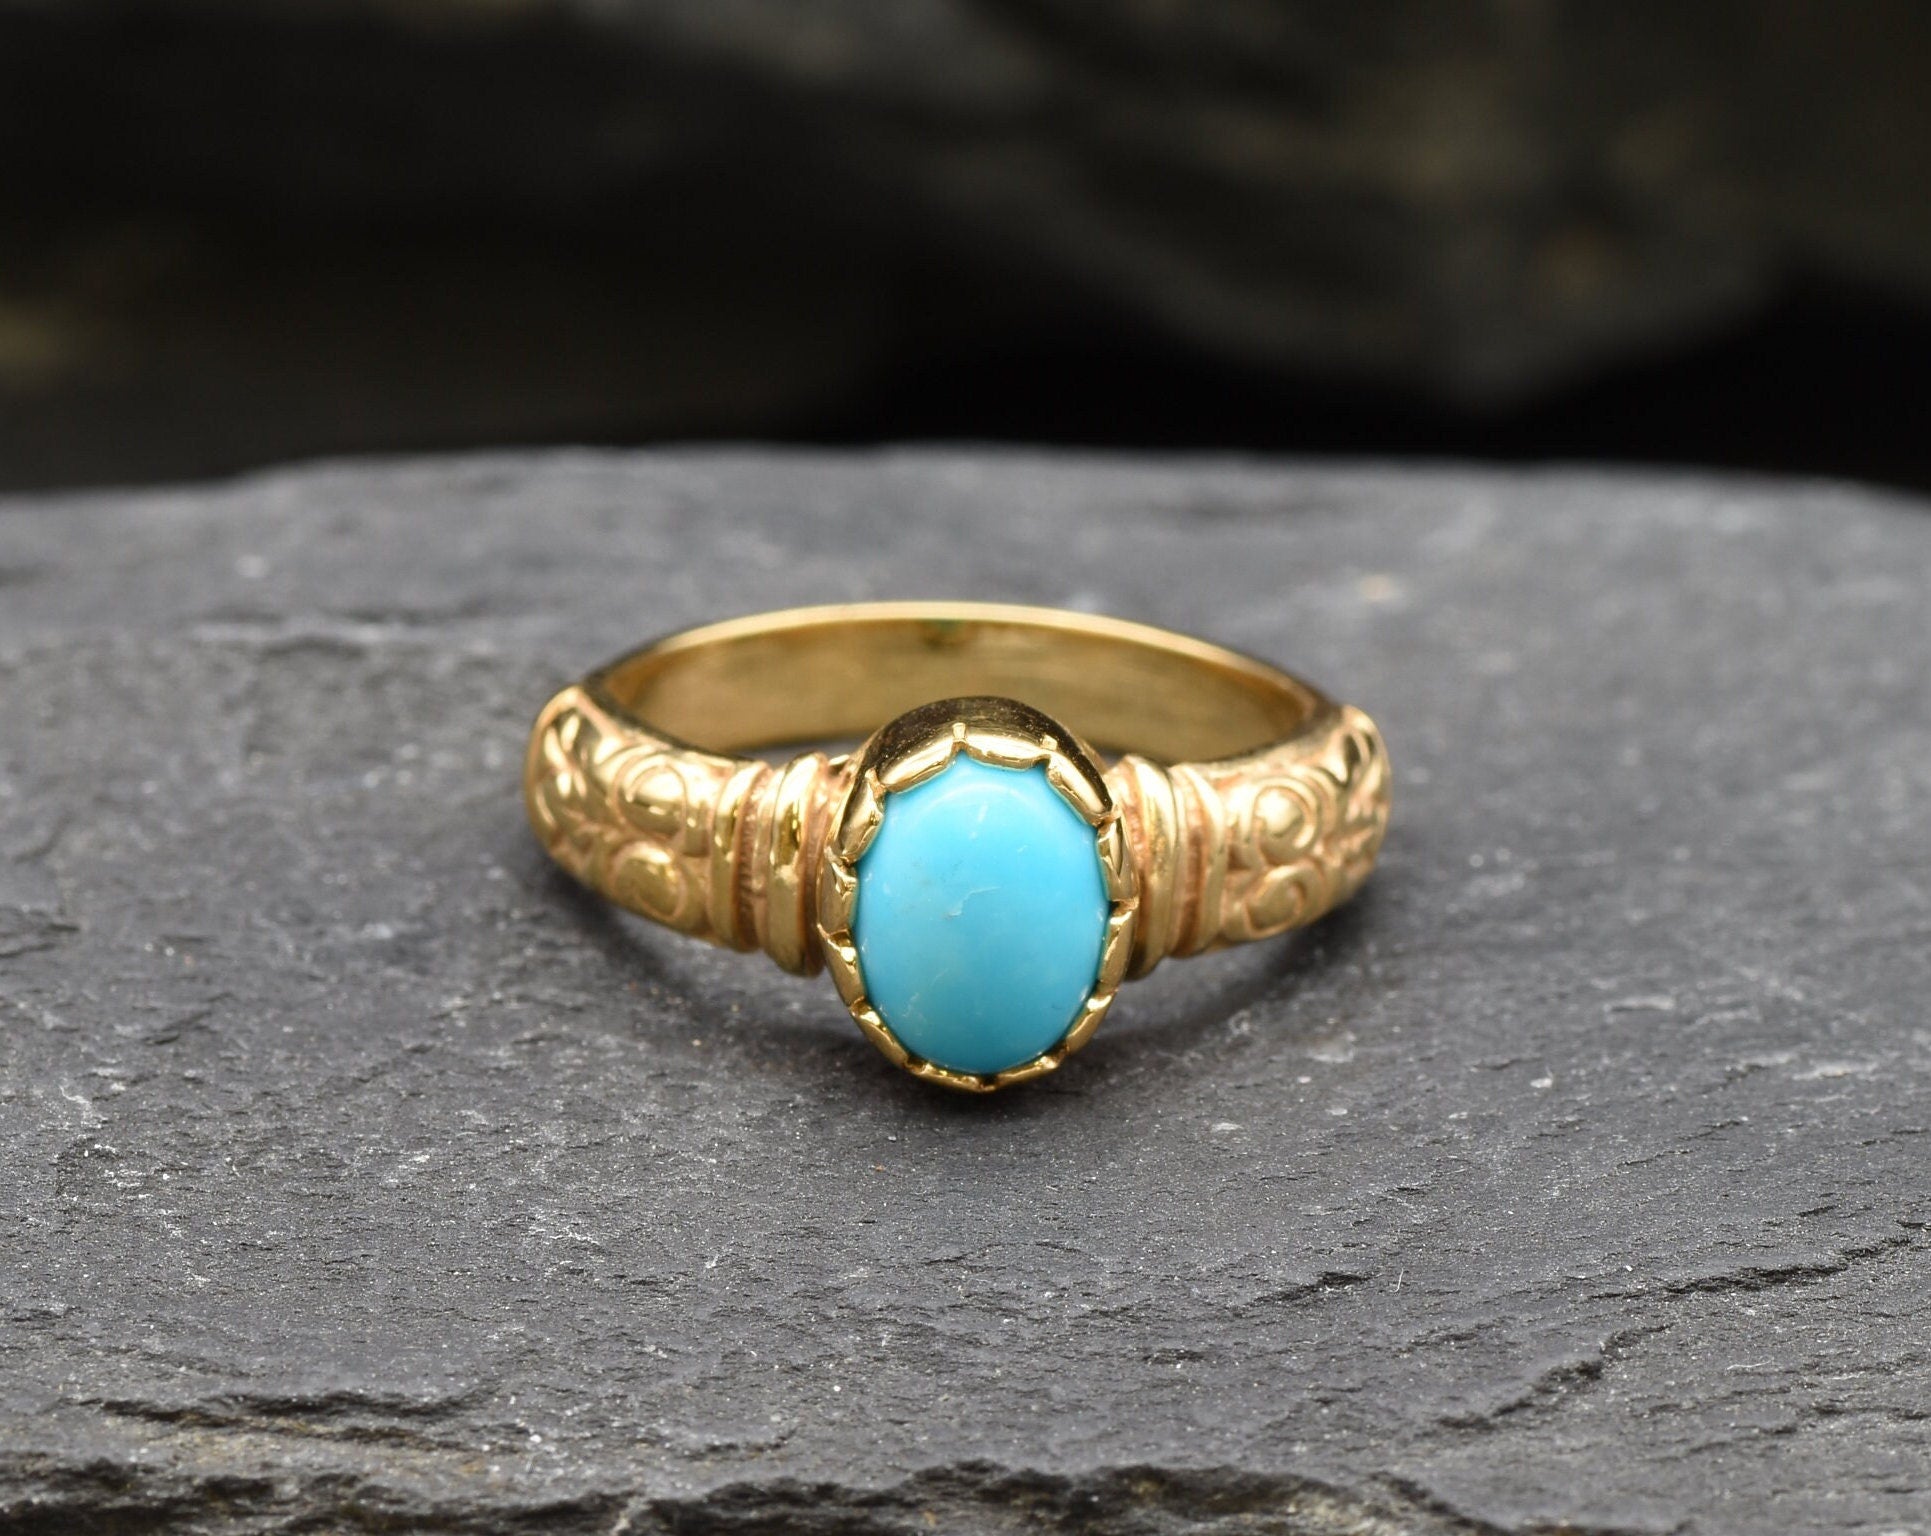 Gold Turquoise Ring, Natural Turquoise, December Birthstone, Gold Tribal Ring, Blue Turquoise Ring, Boho Ring, Vermeil Ring, Real Turquoise